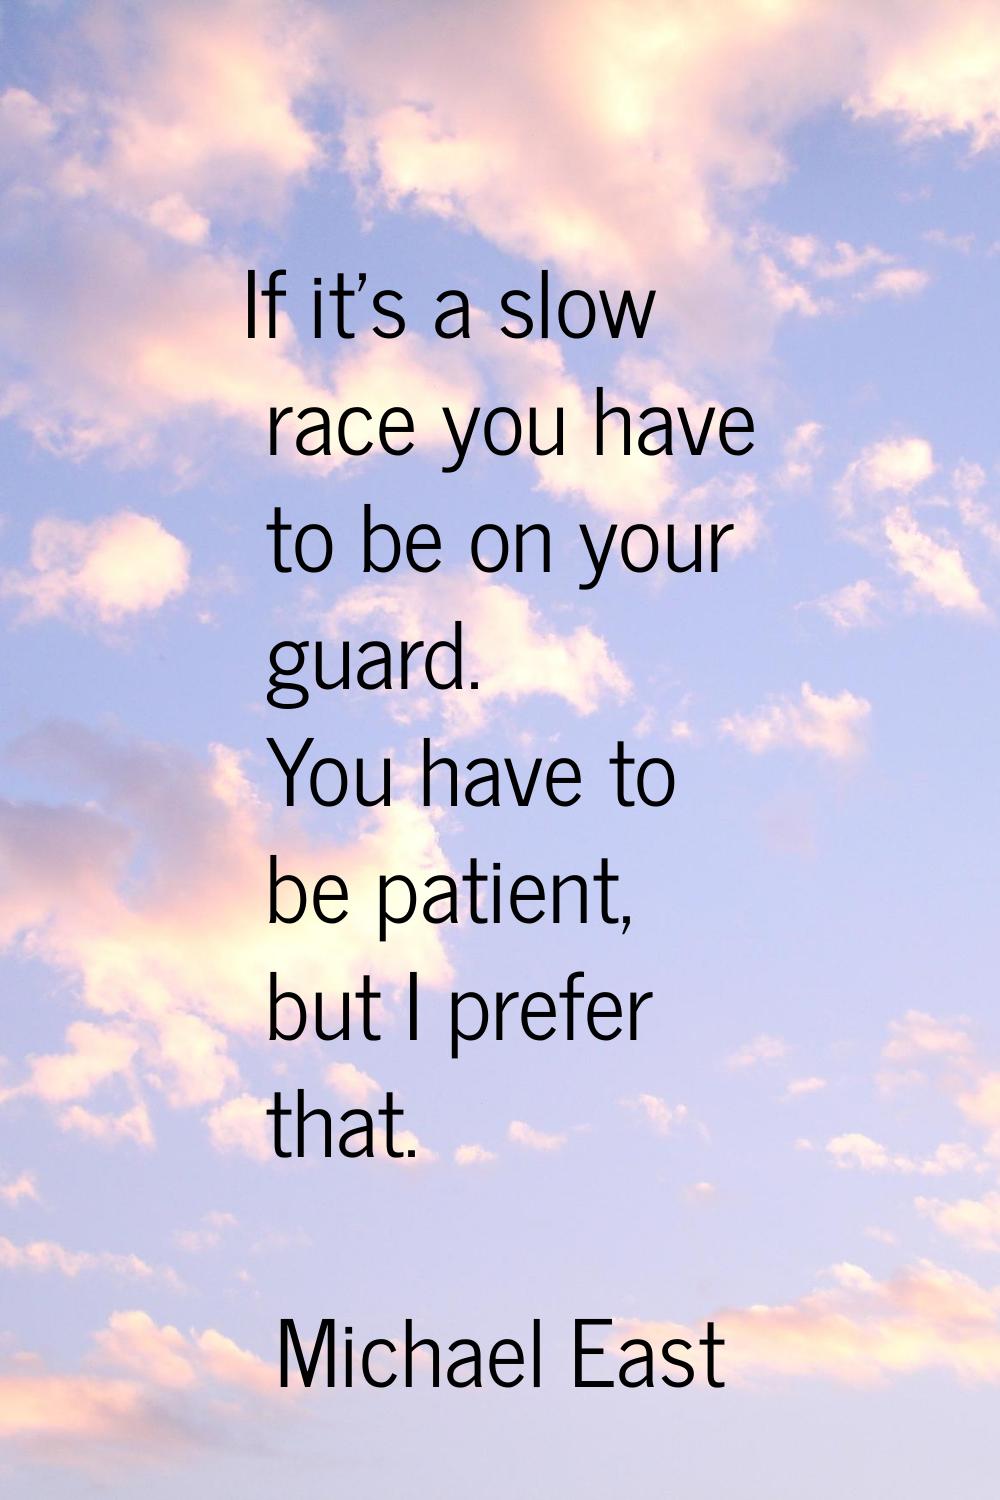 If it's a slow race you have to be on your guard. You have to be patient, but I prefer that.